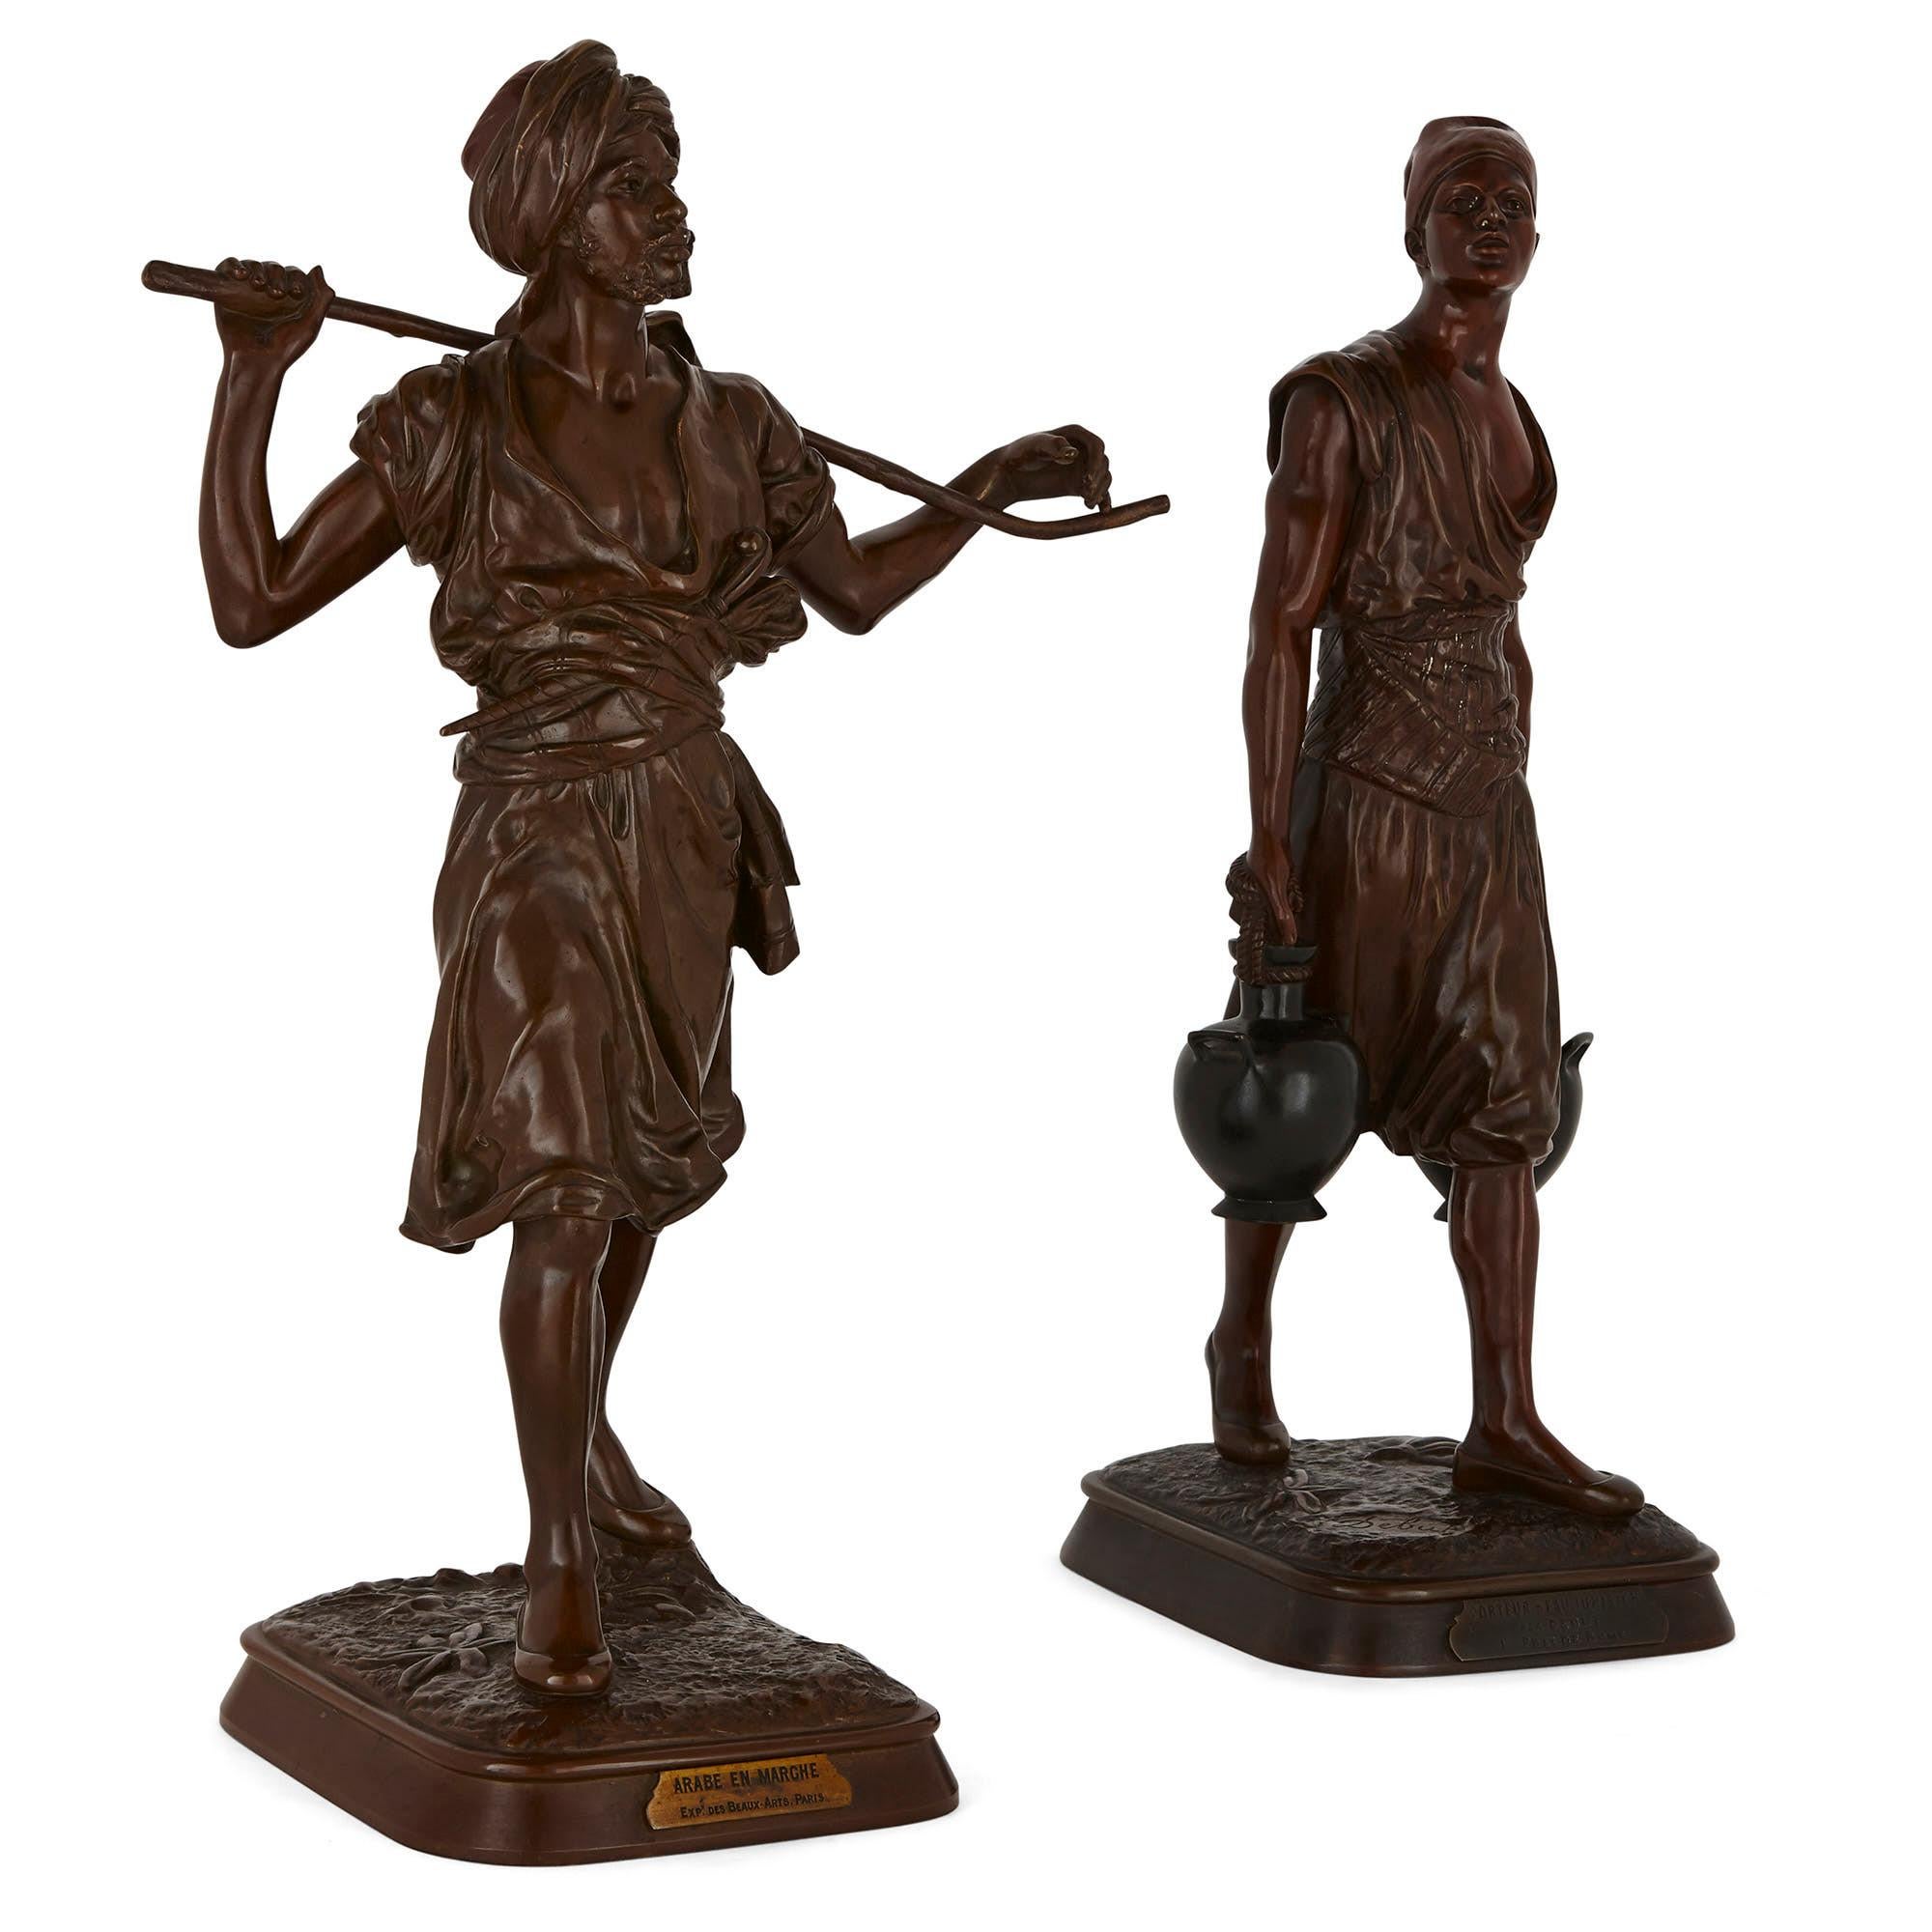 These exceptional patinated bronze statues depict ‘Arabe en Marche’ (Arab on the move) and Porteau d’Eau Tunisien (Tunisian water carrier). The former was created by the sculptor Emile Pinedo and the latter by Marcel Début. These artists were